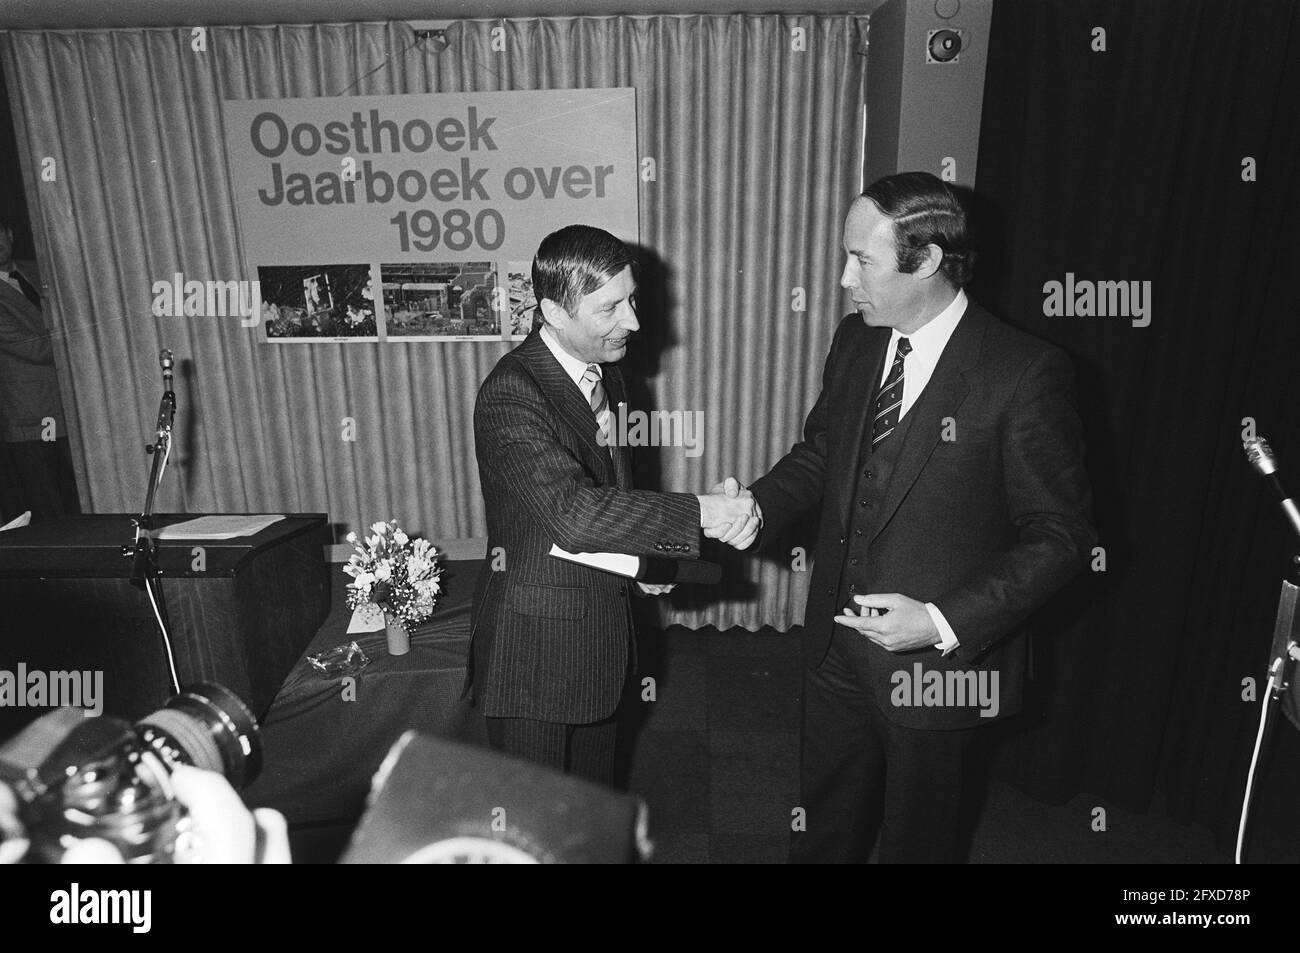 Presentation Yearbook of Oosthoek Encyclopedy, Van Agt shakes hands with Smit (general director of Oosthoek), April 9, 1981, yearbooks, presentations, The Netherlands, 20th century press agency photo, news to remember, documentary, historic photography 1945-1990, visual stories, human history of the Twentieth Century, capturing moments in time Stock Photo